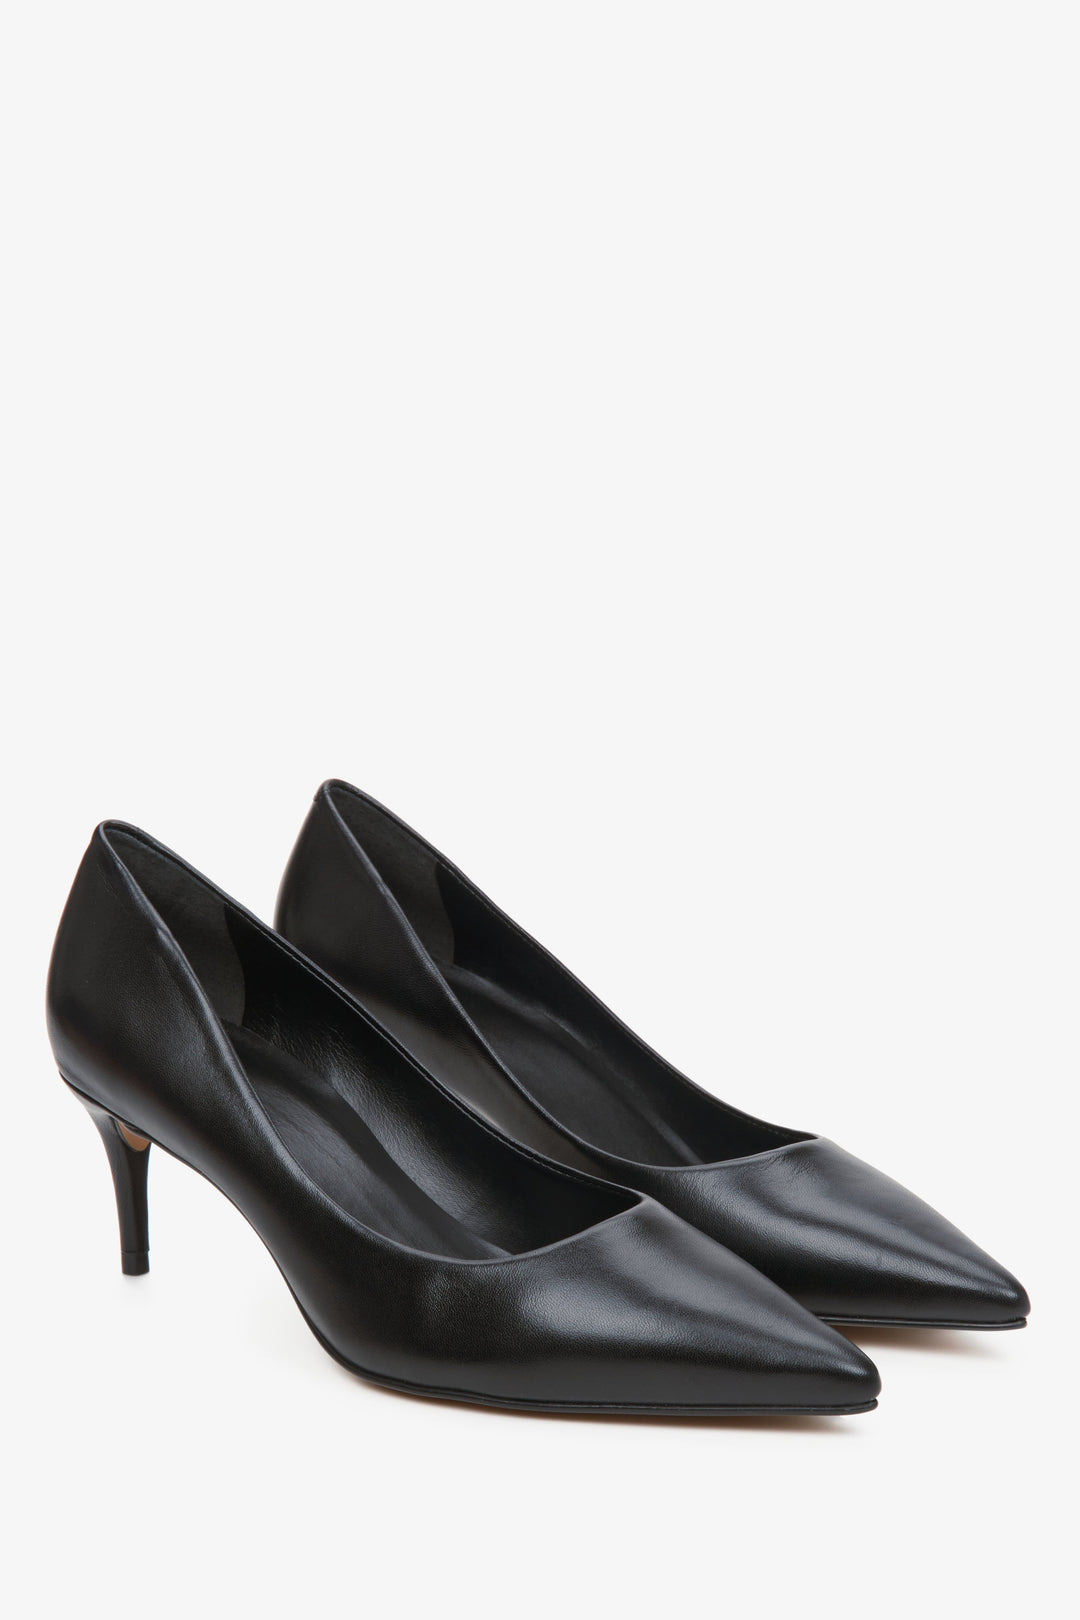 Leather women's pumps in black color by Estro - close-up of the shoe's toe.